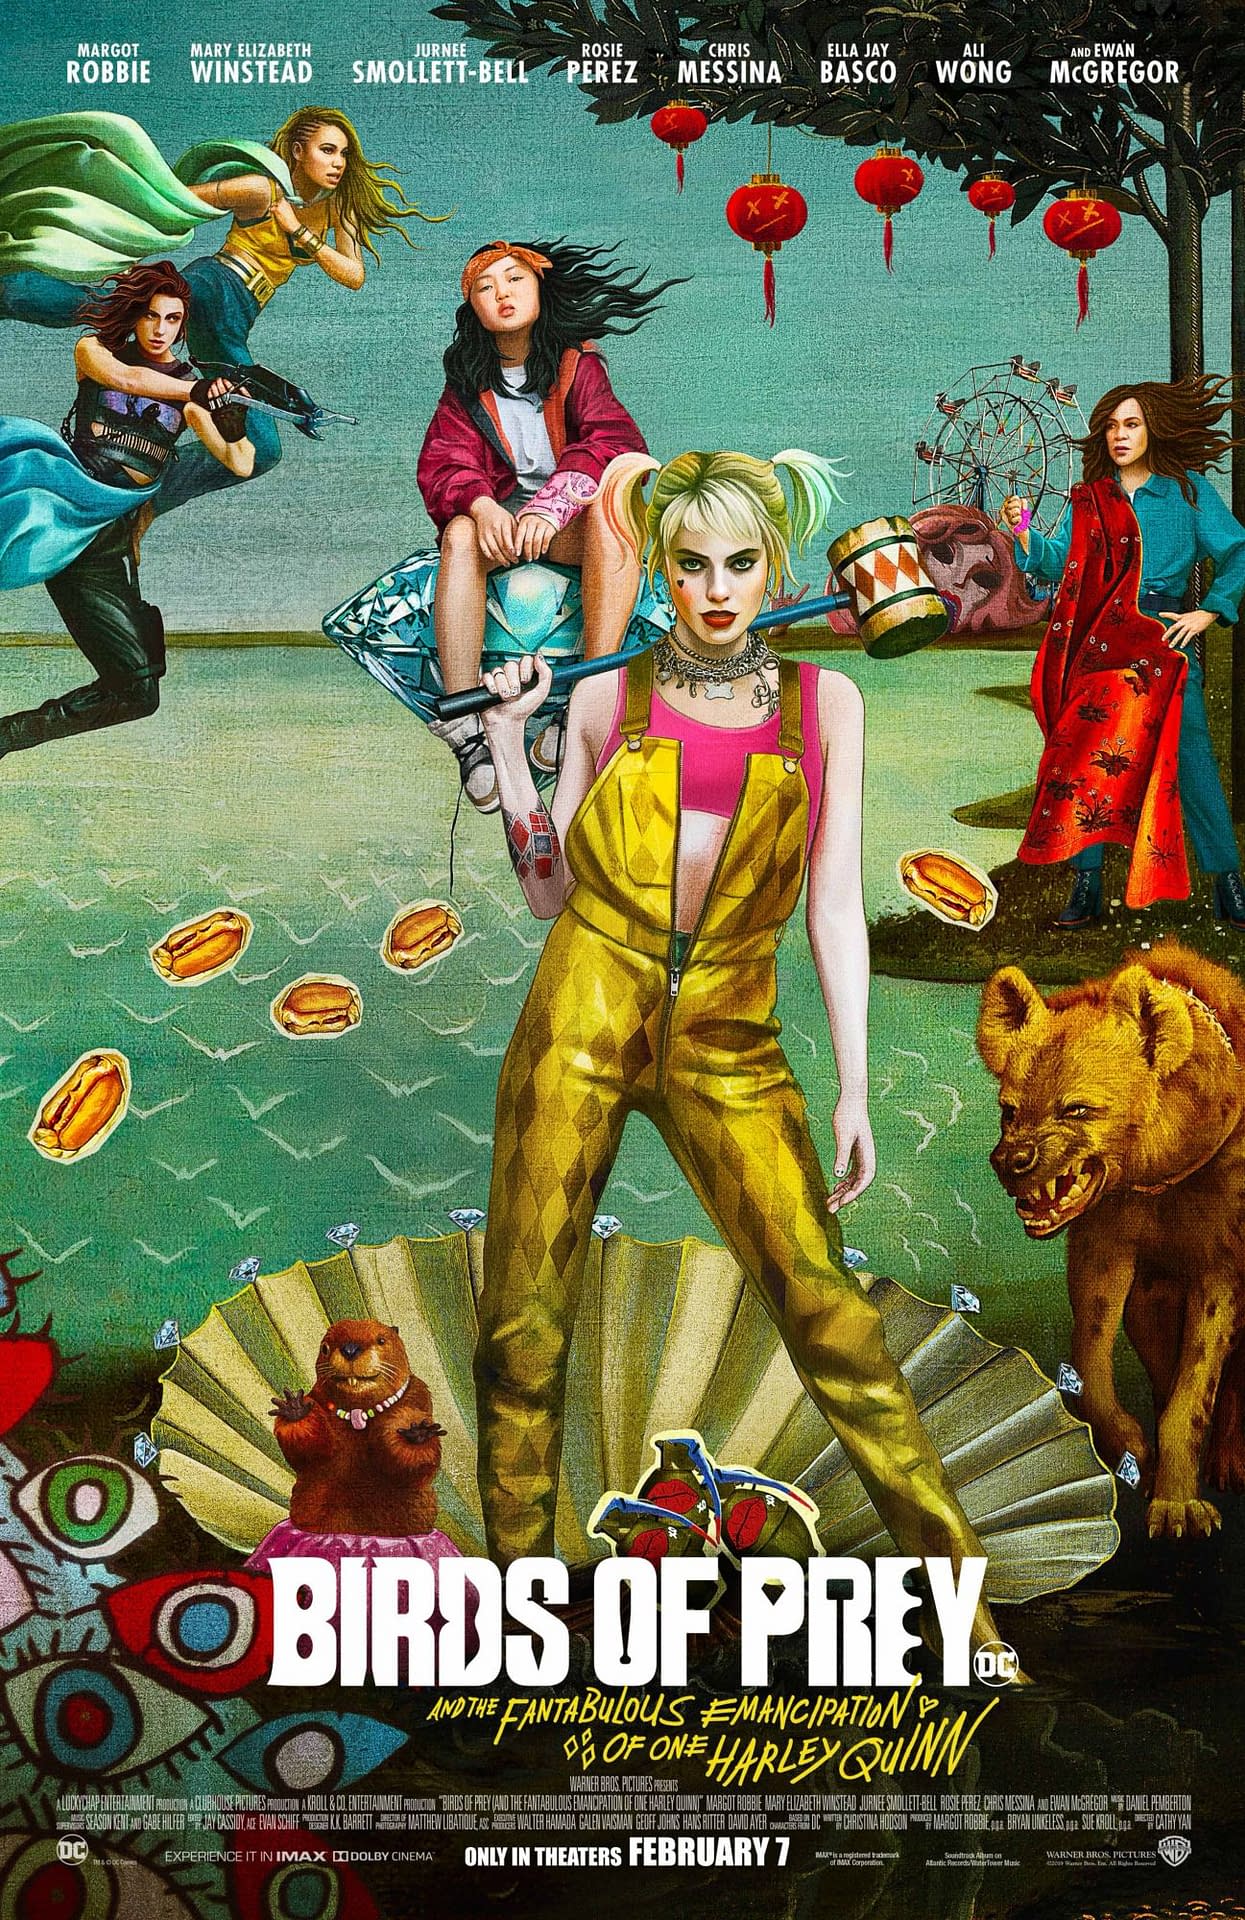 New Poster for "Birds of Prey: And the Fantabulous Emancipation of One Harley Quinn"